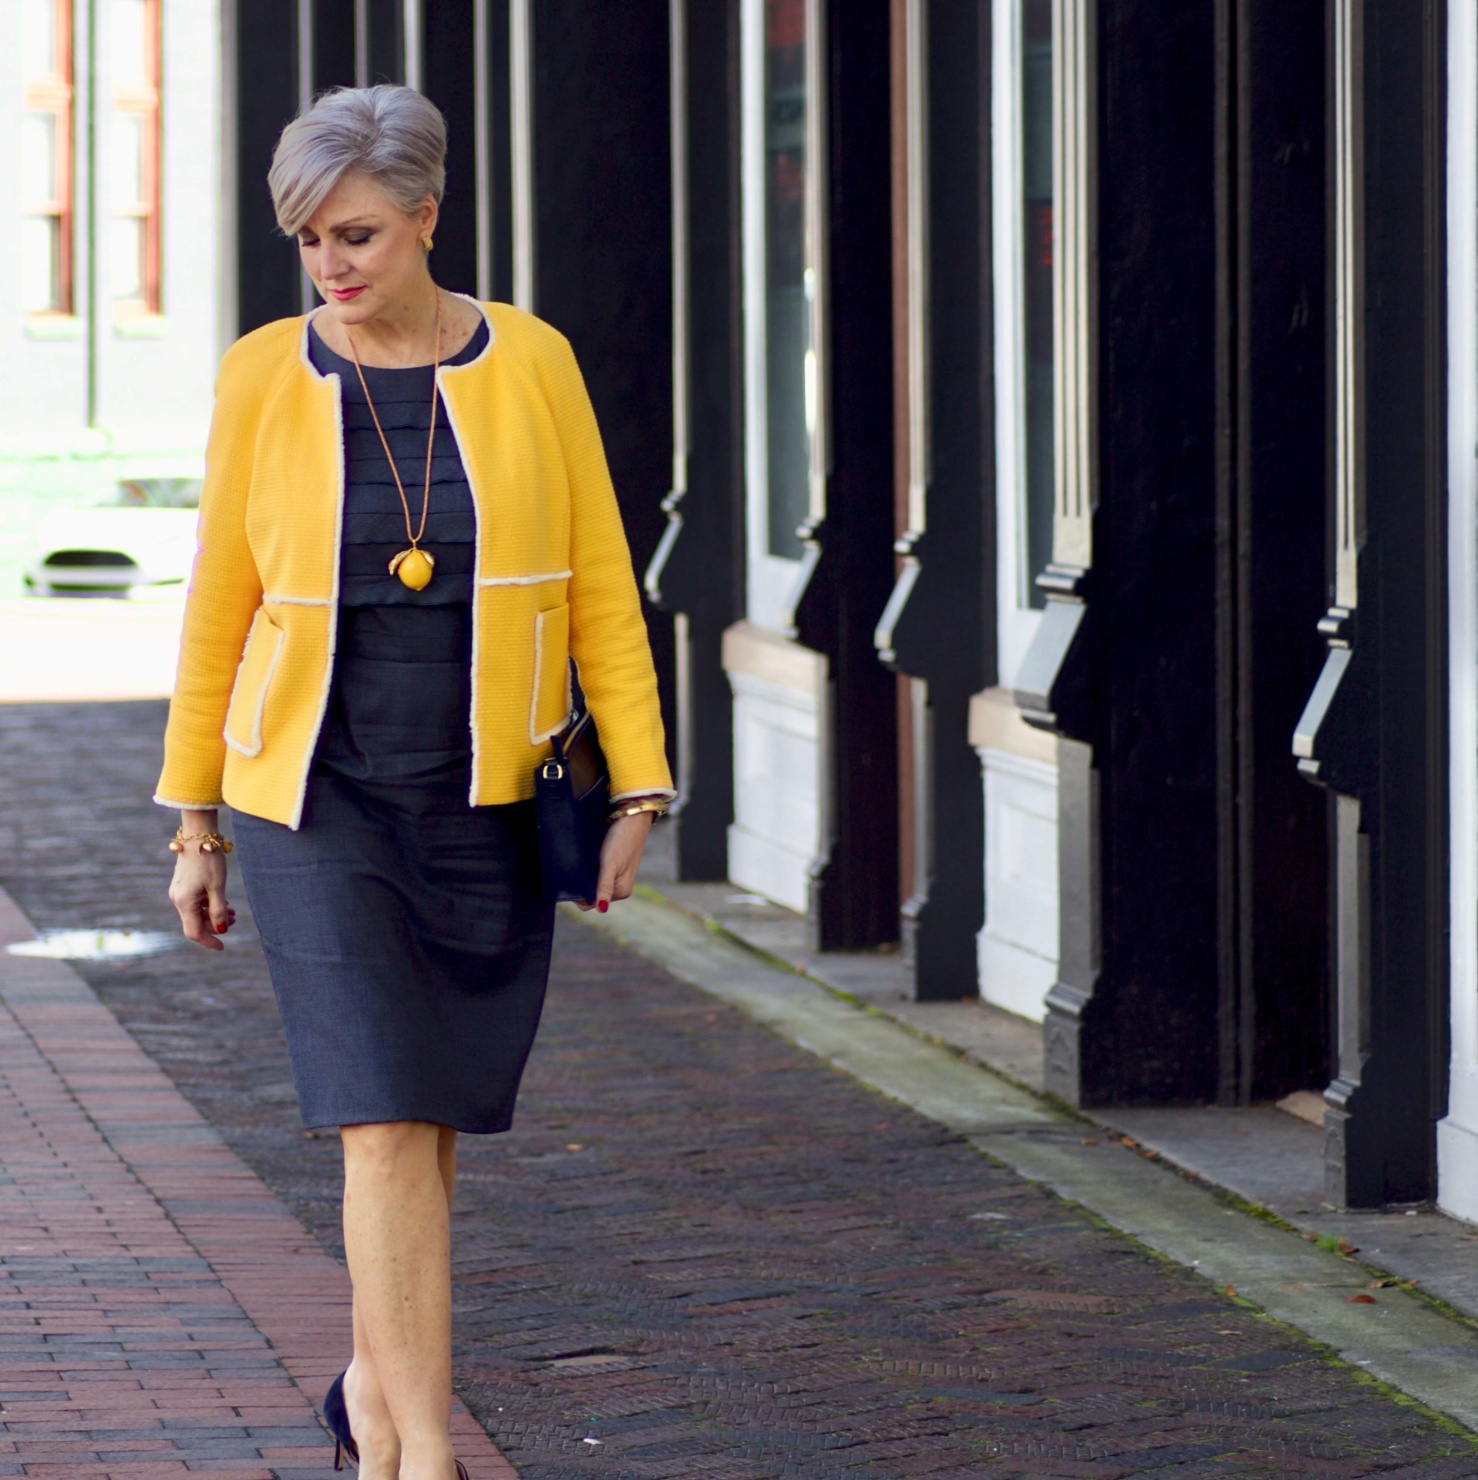 beth from Style at a Certain Age wears a navy blue sheath dress, Boden yellow jacket, navy suede shoes, Tory Burch lemon locket